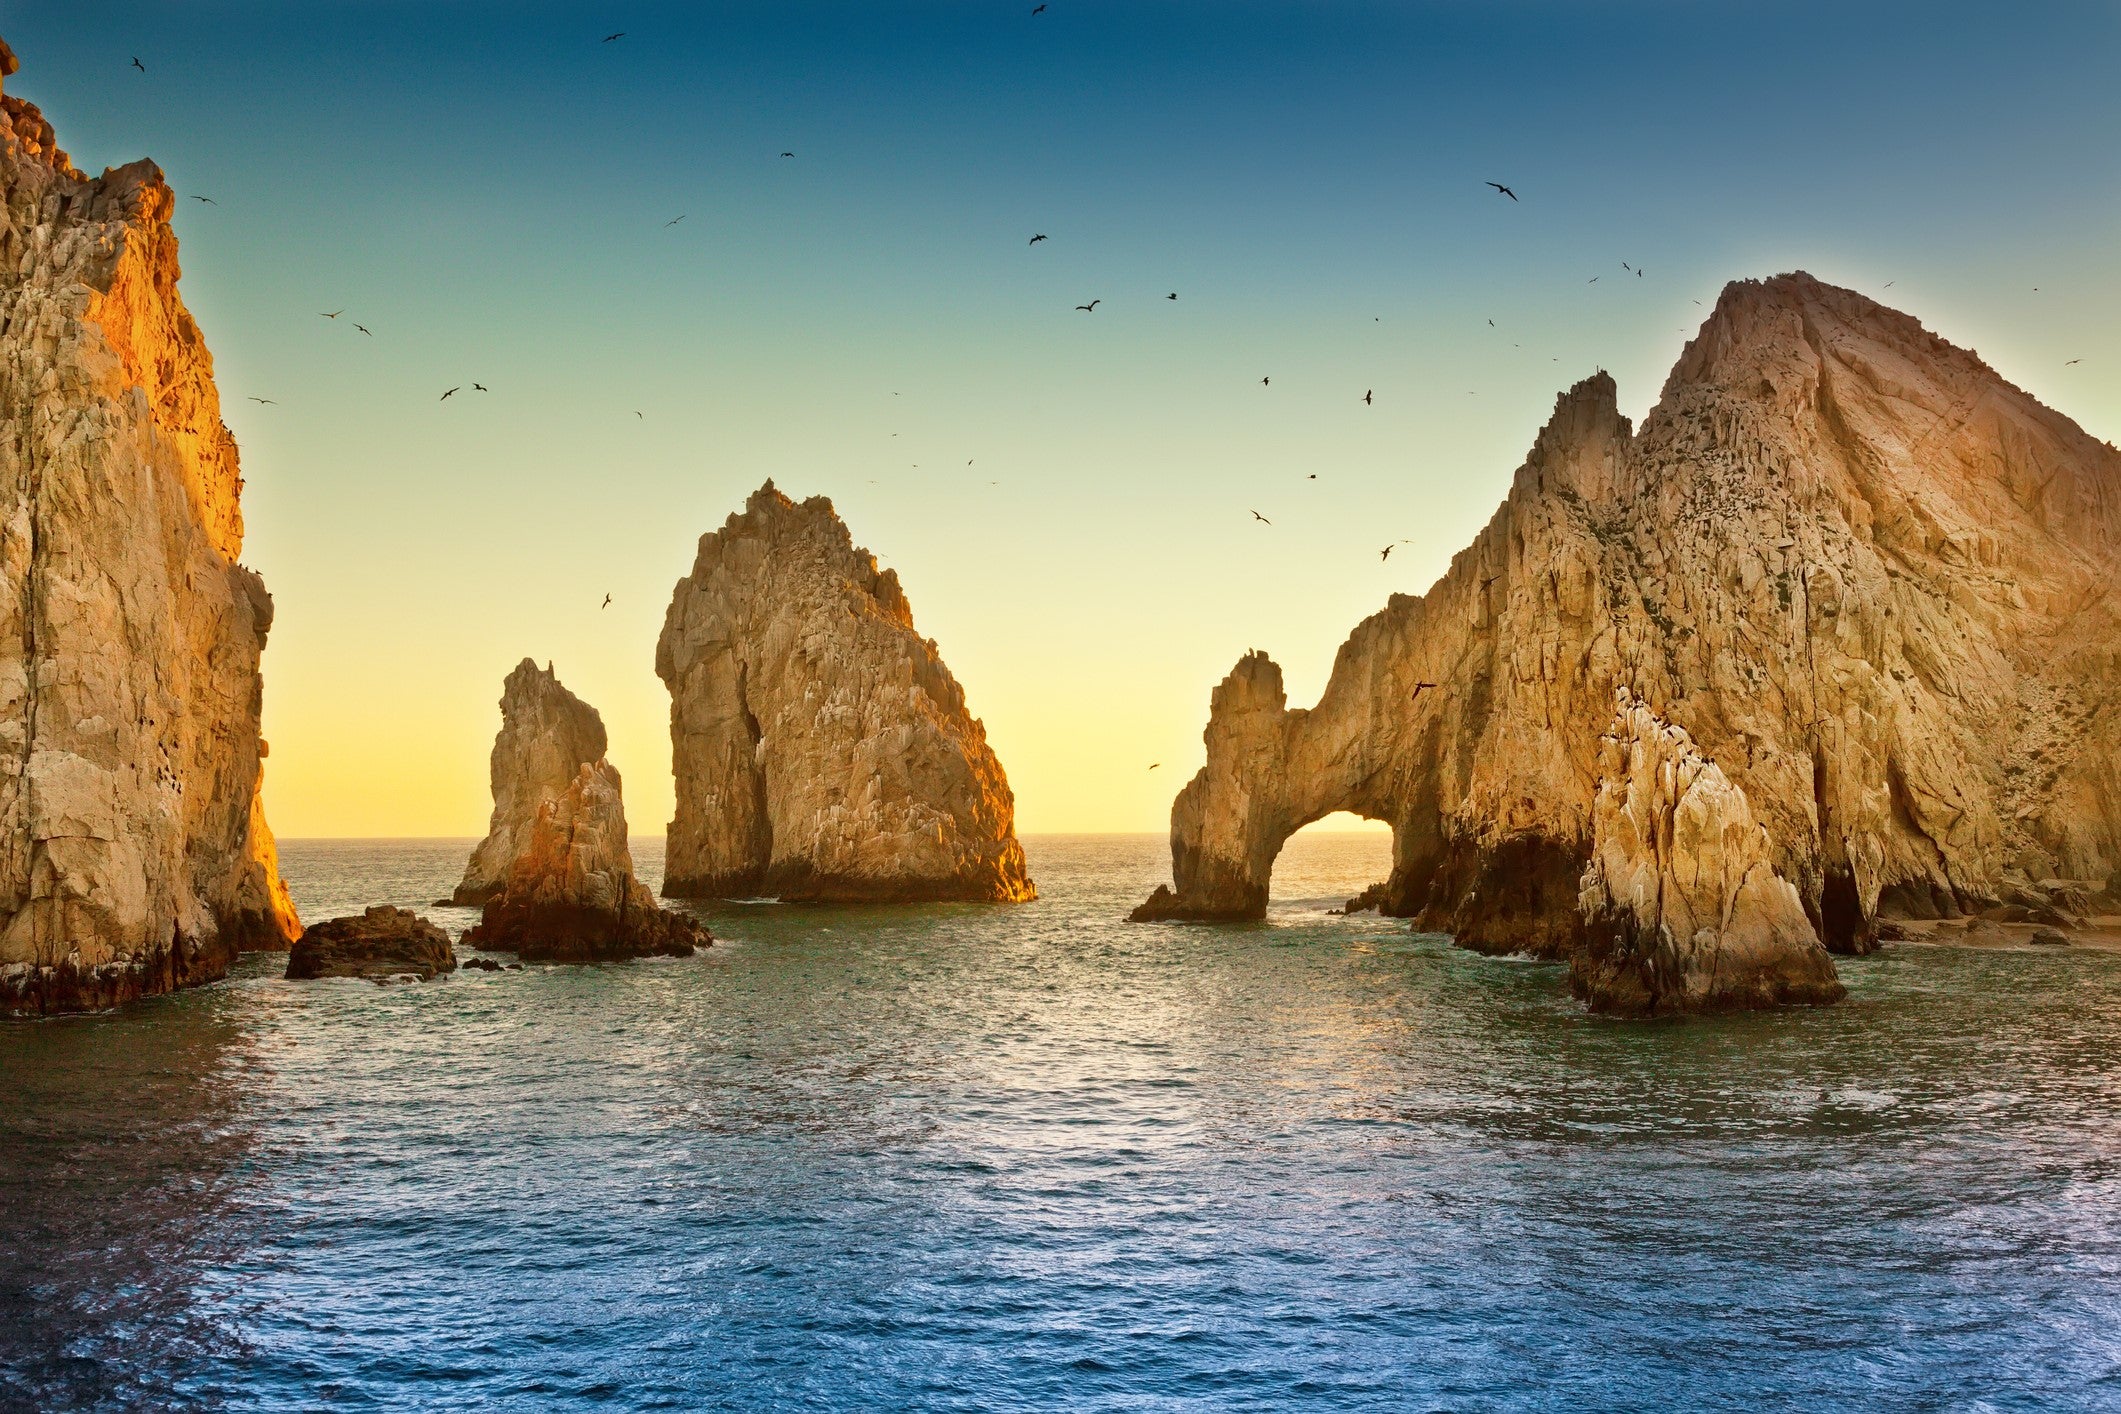 Los Cabos in Mexico stays warm into January